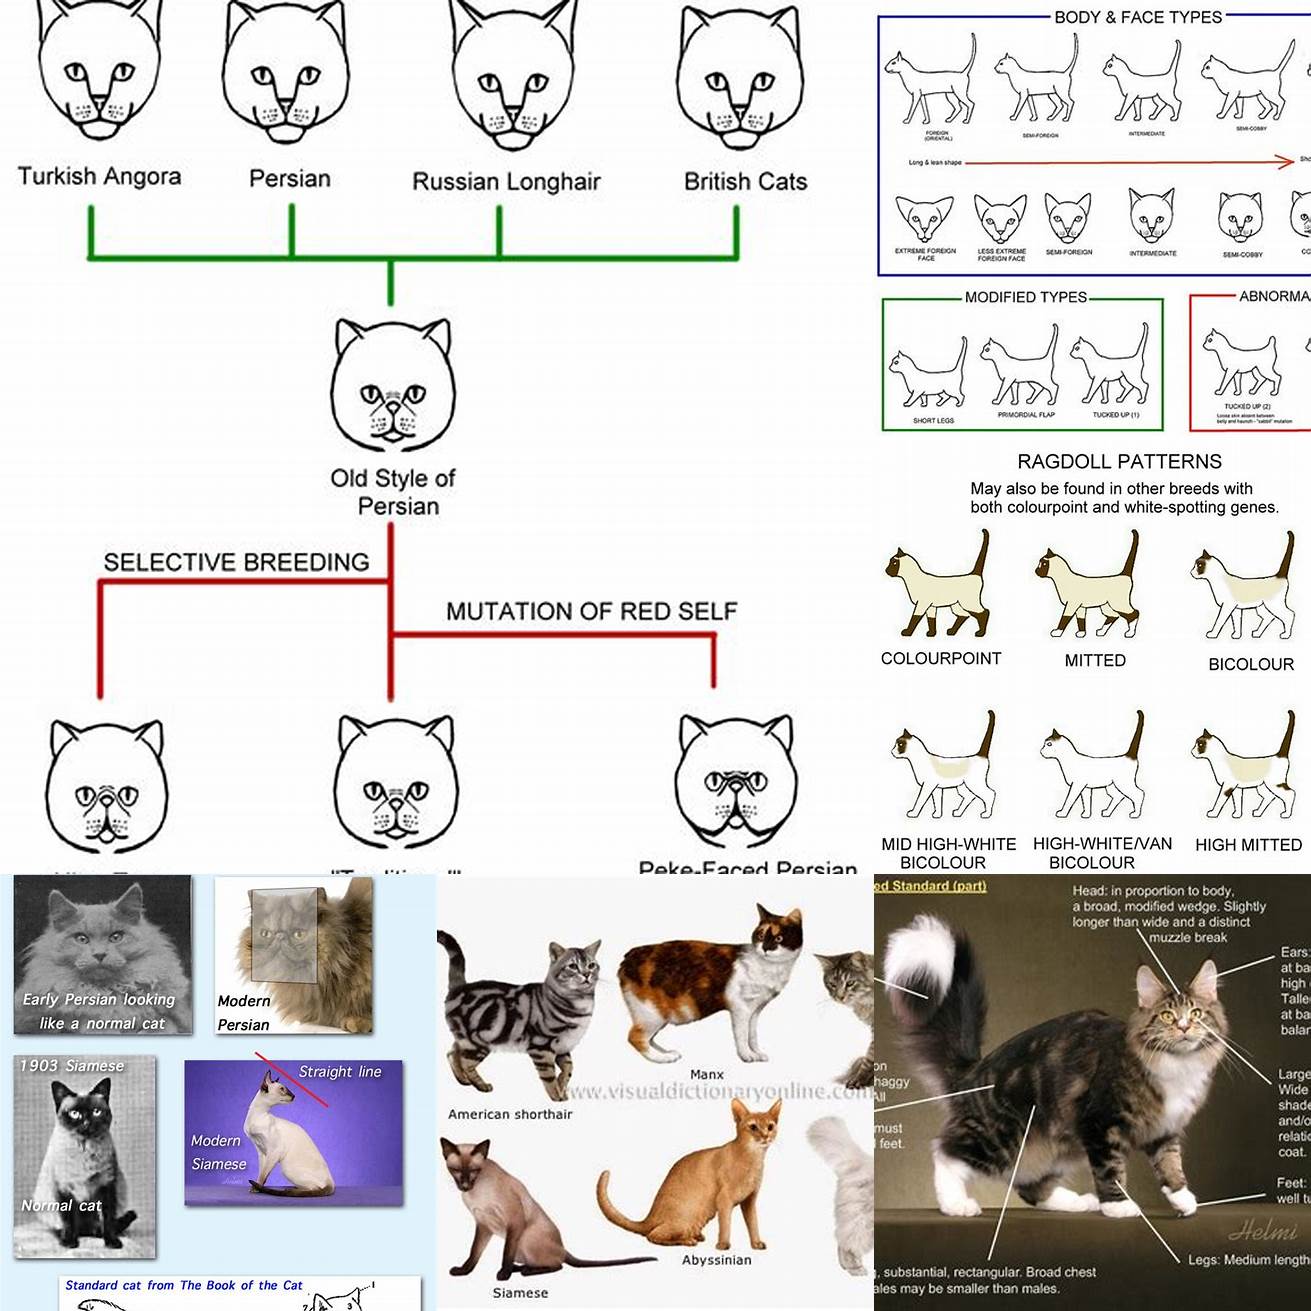 Showcasing the cats conformation and breed standards